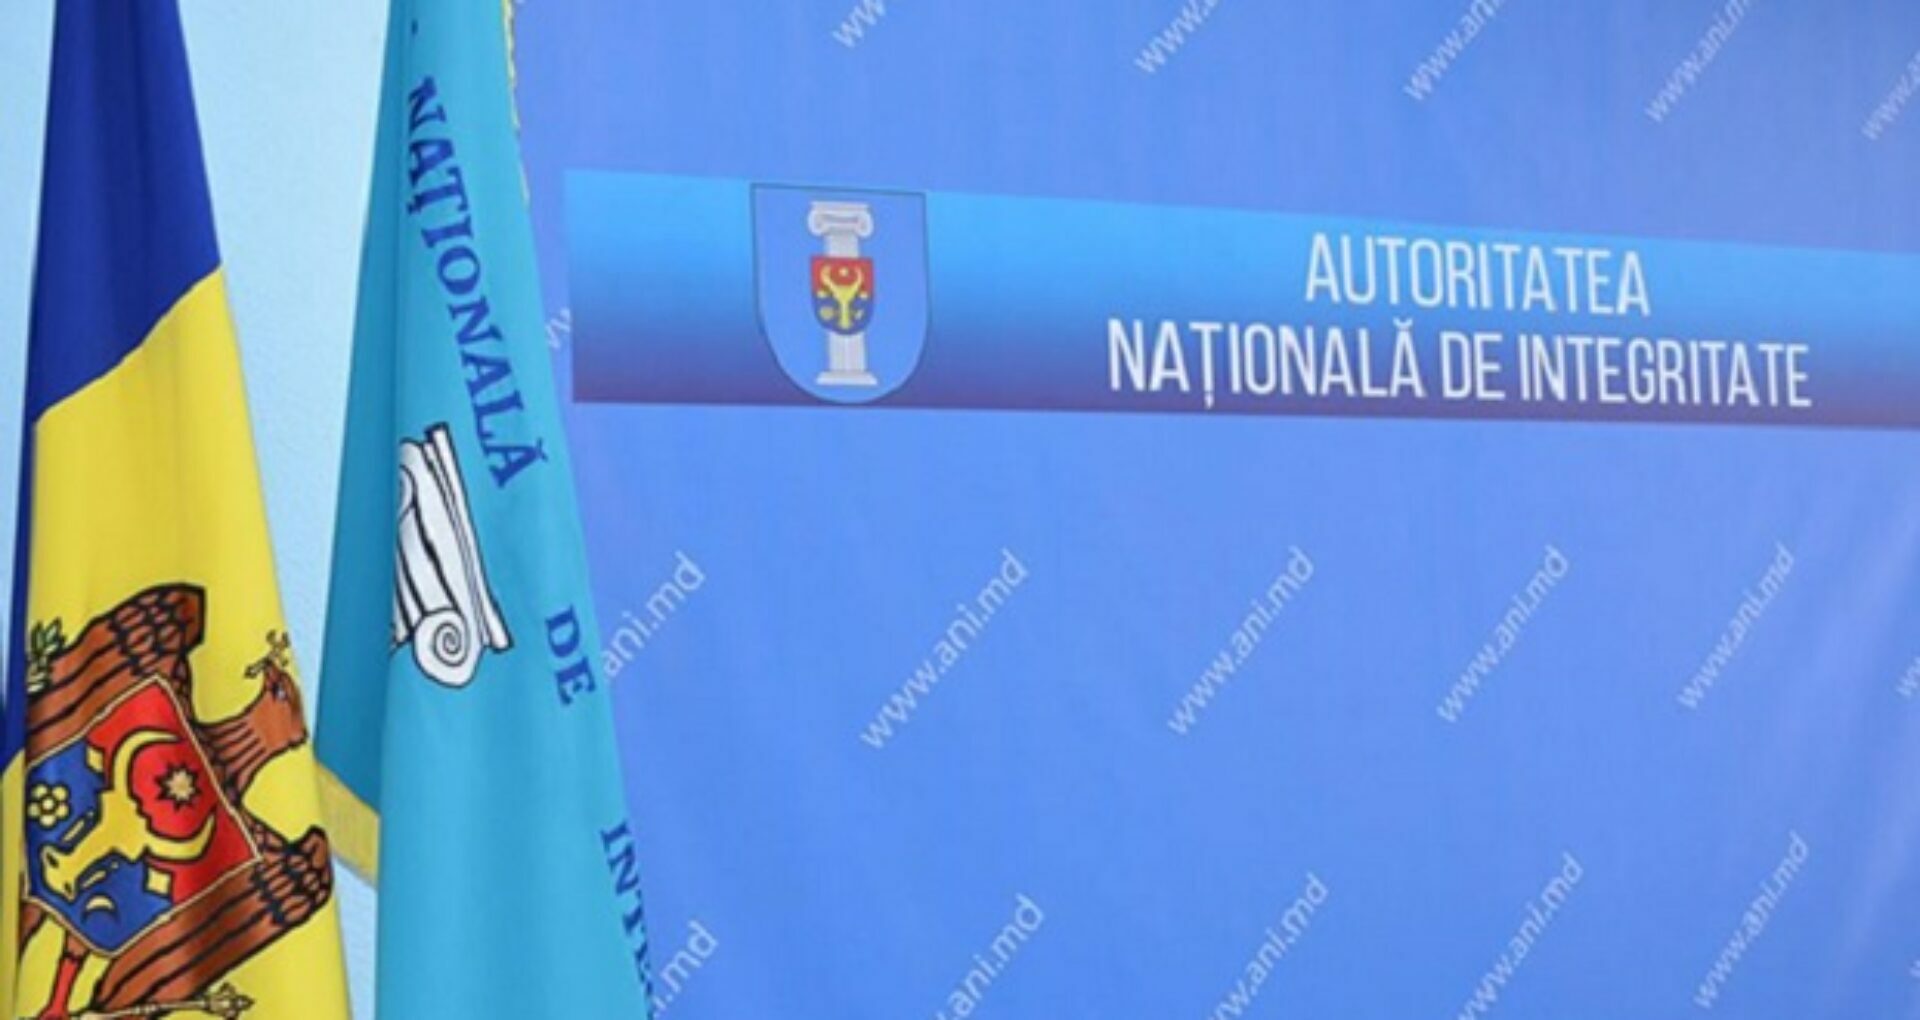 The National Integrity Authority Issues Fines of Over 1,000 Euros to Judges, Civil Servants, and a Prosecutor